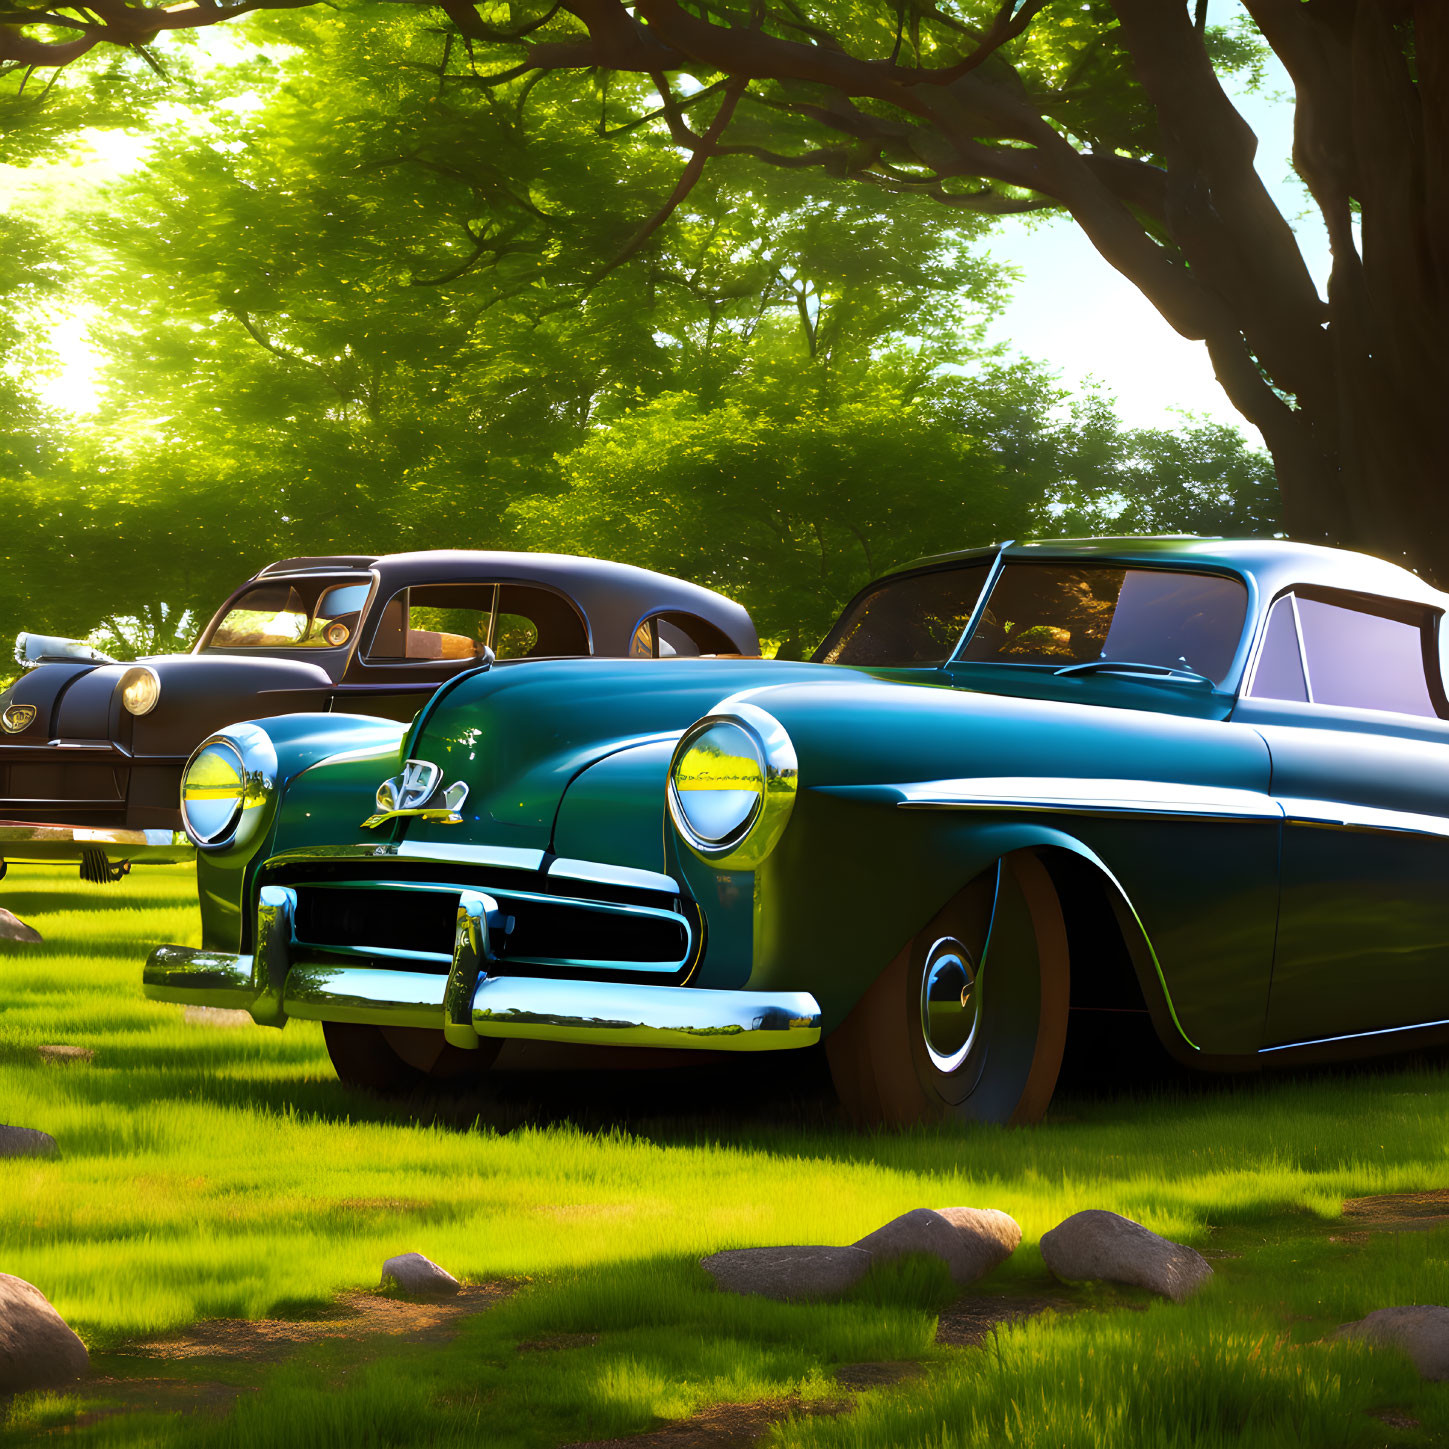 Classic Cars Parked in Forest Clearing Among Trees